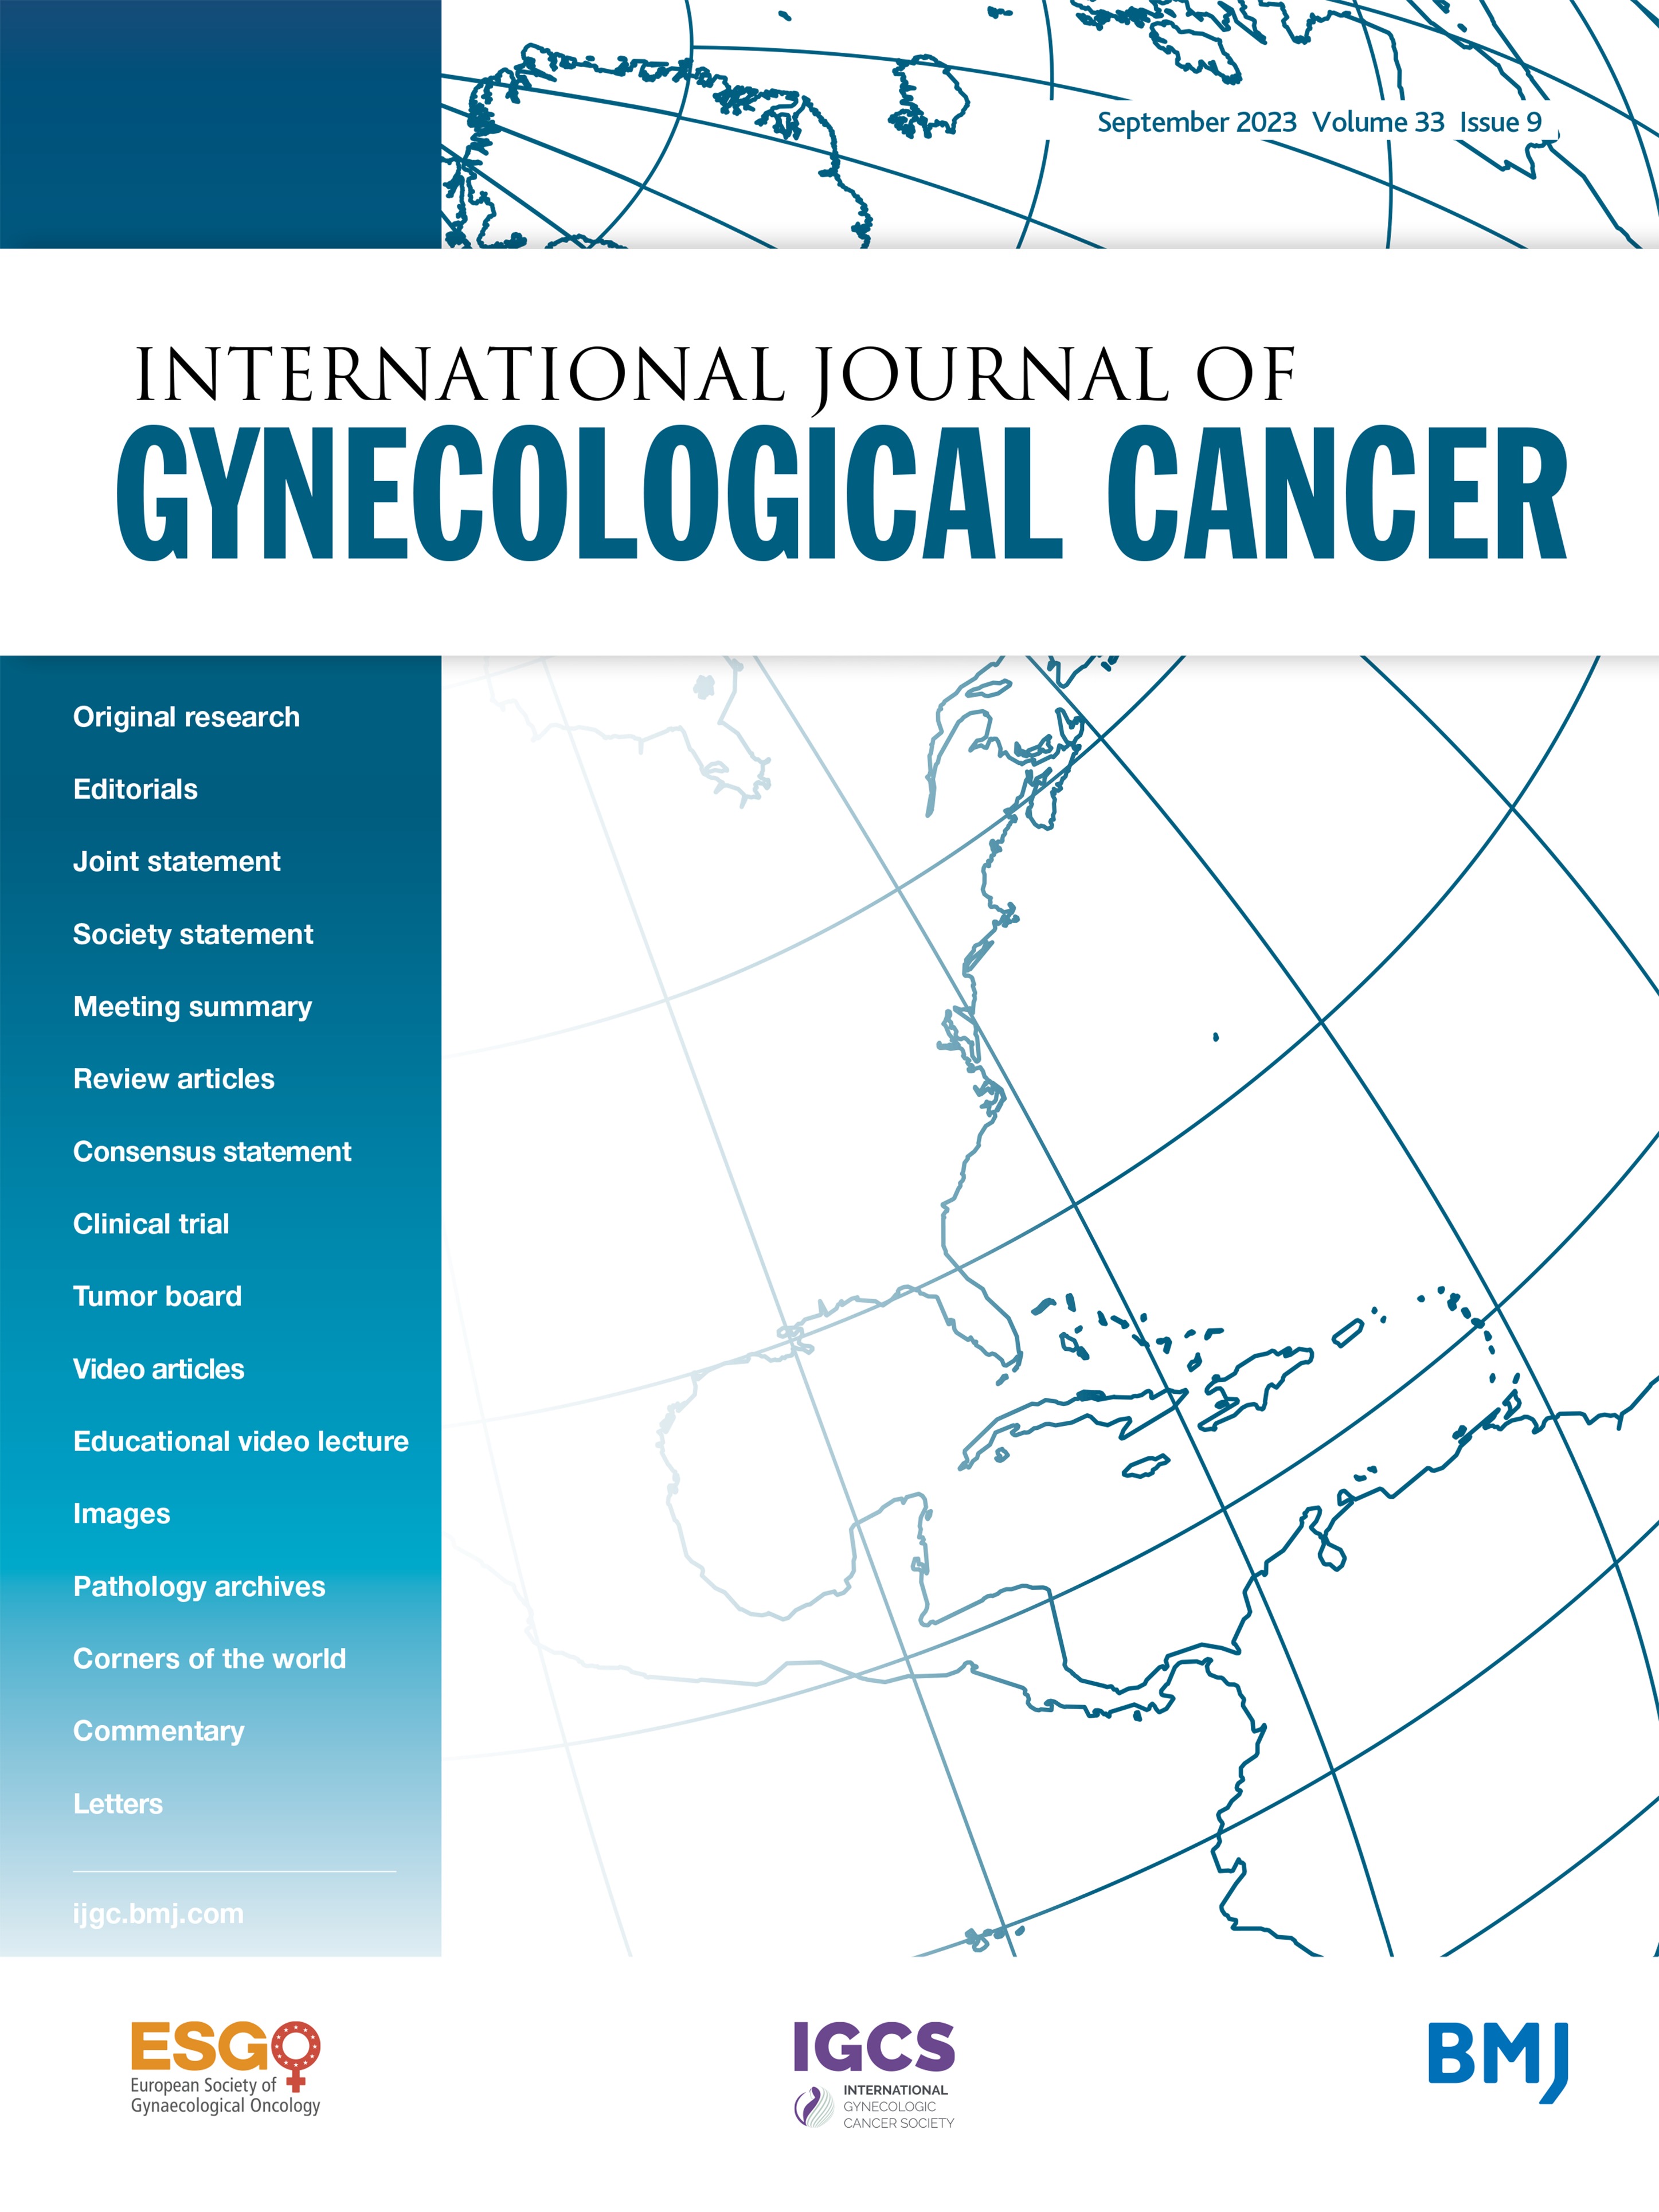 Race and ethnicity reporting in endometrial cancer literature